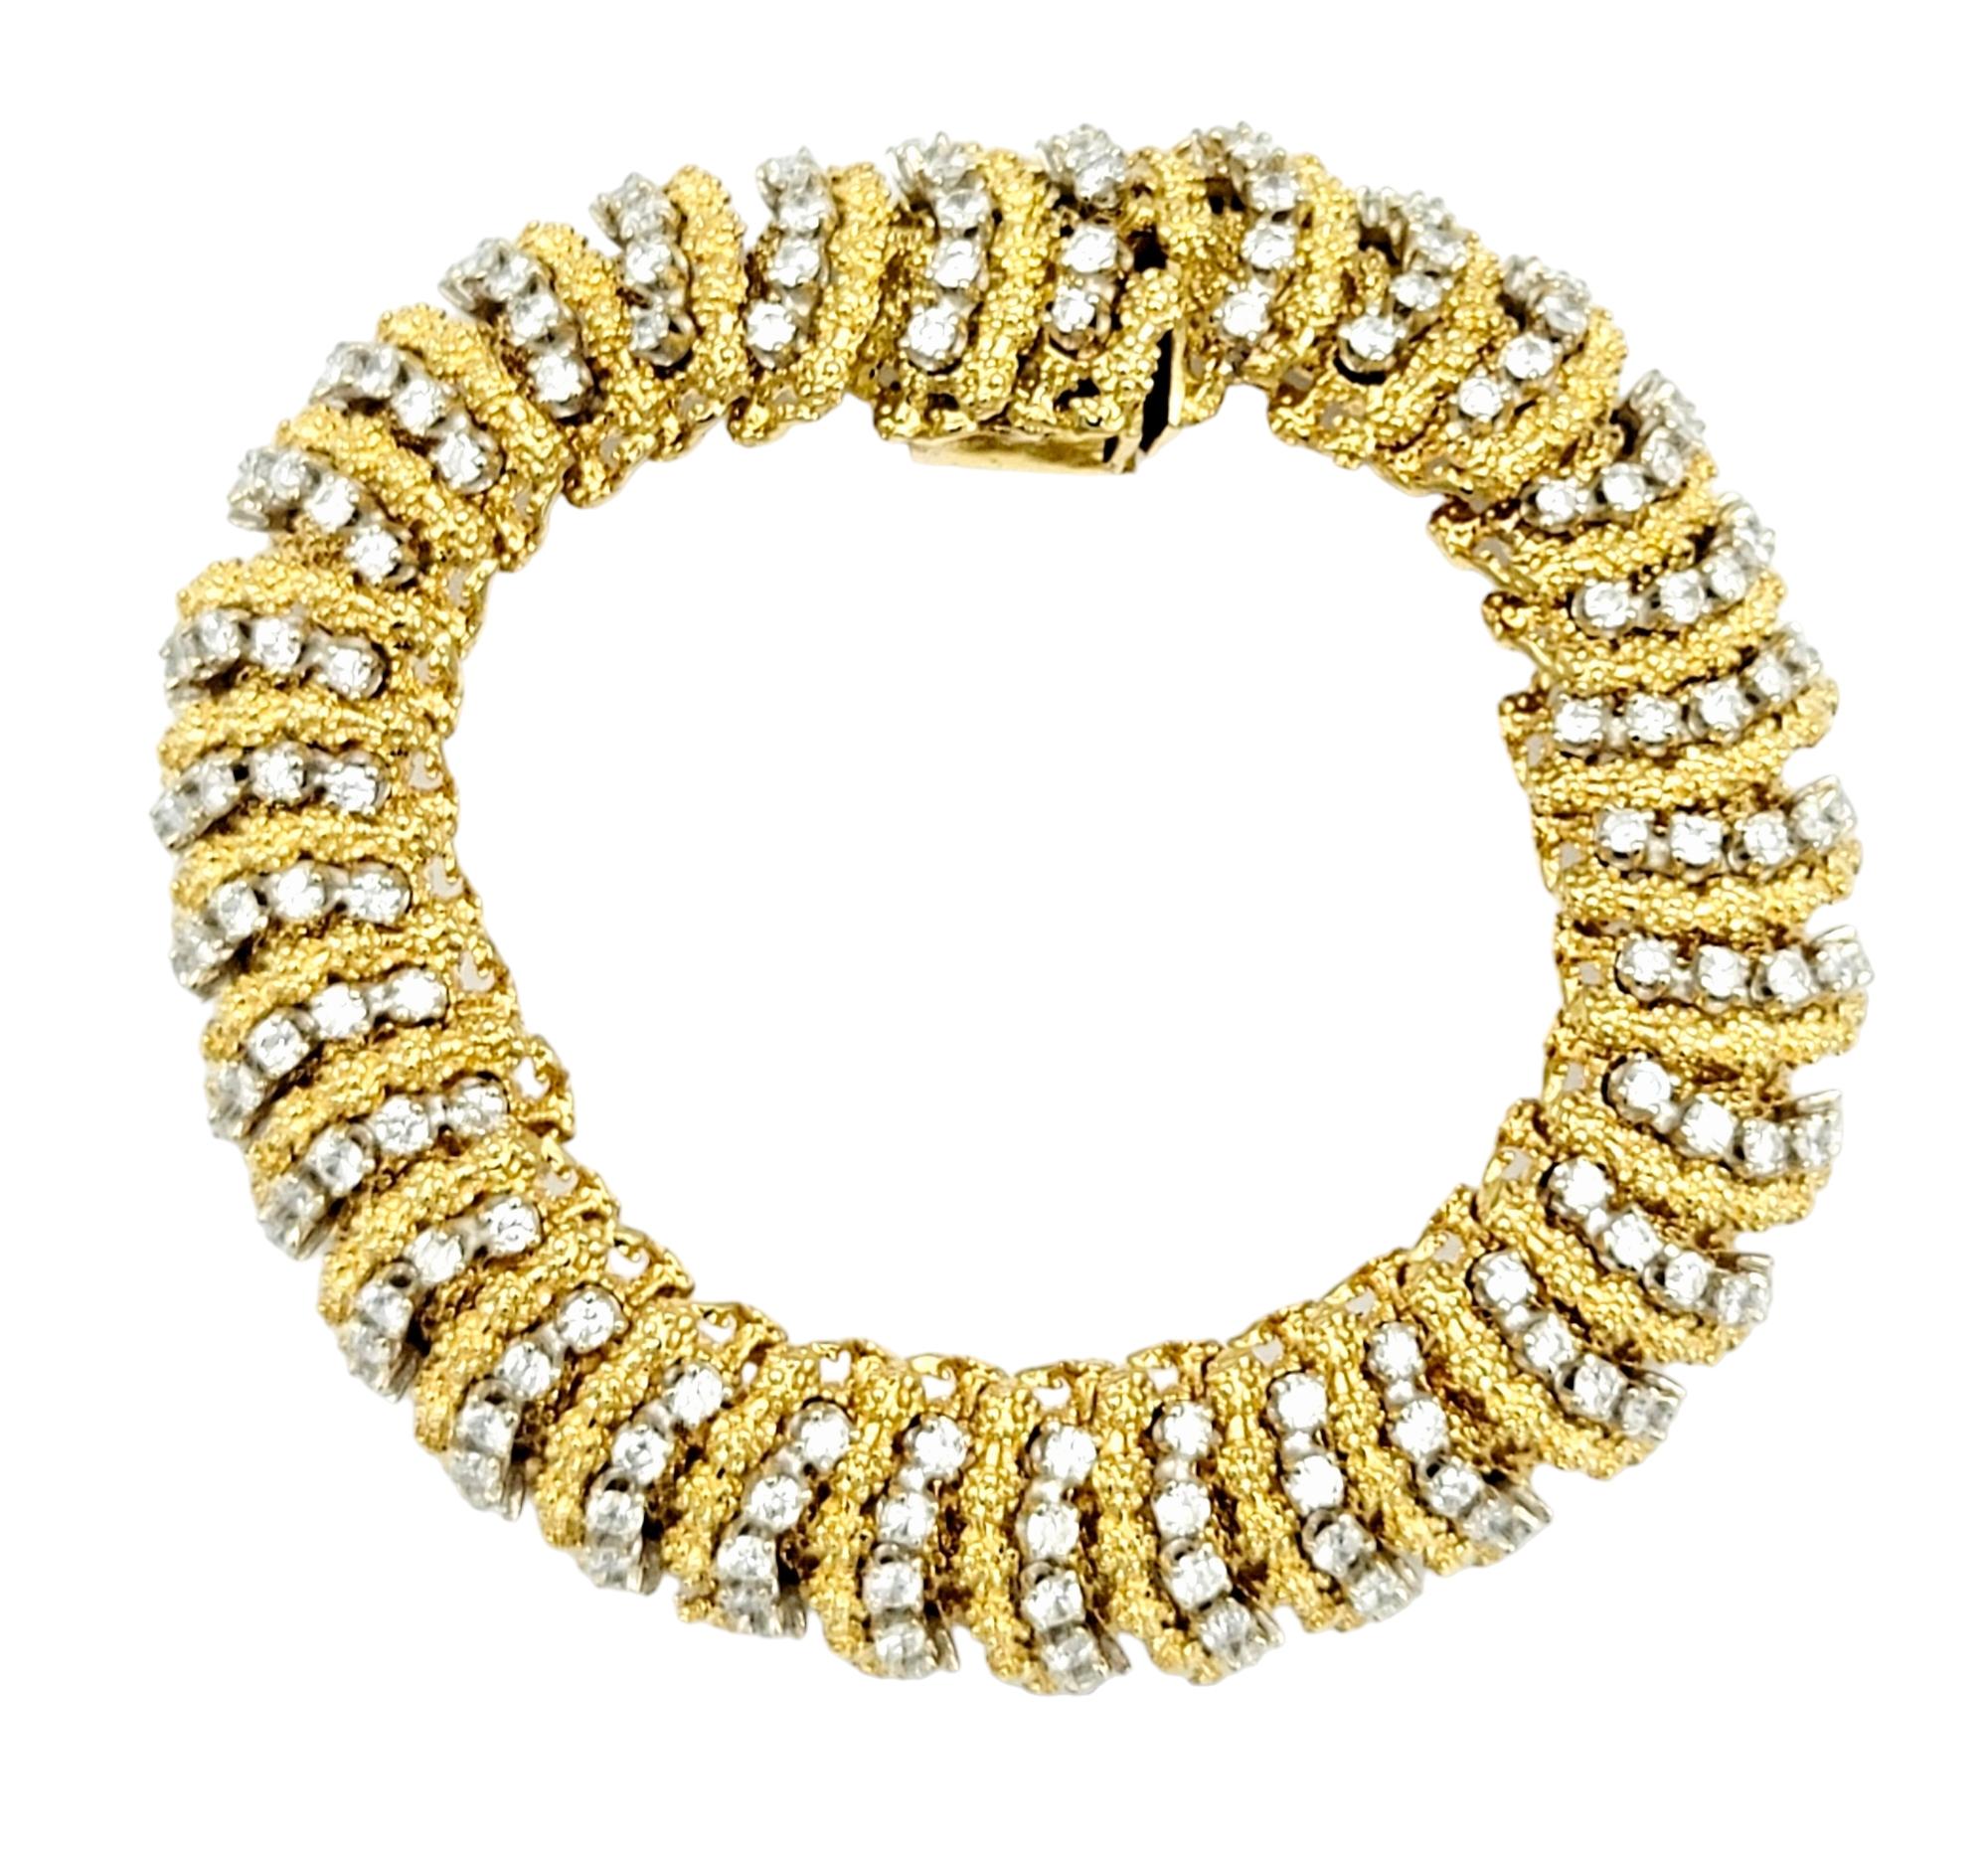 The gold and diamond vintage caterpillar bracelet by the renowned Hammerman Brothers is a true testament to timeless elegance and expert craftsmanship. Set in luxurious 18-karat yellow gold, this bracelet features a distinctive design that mimics